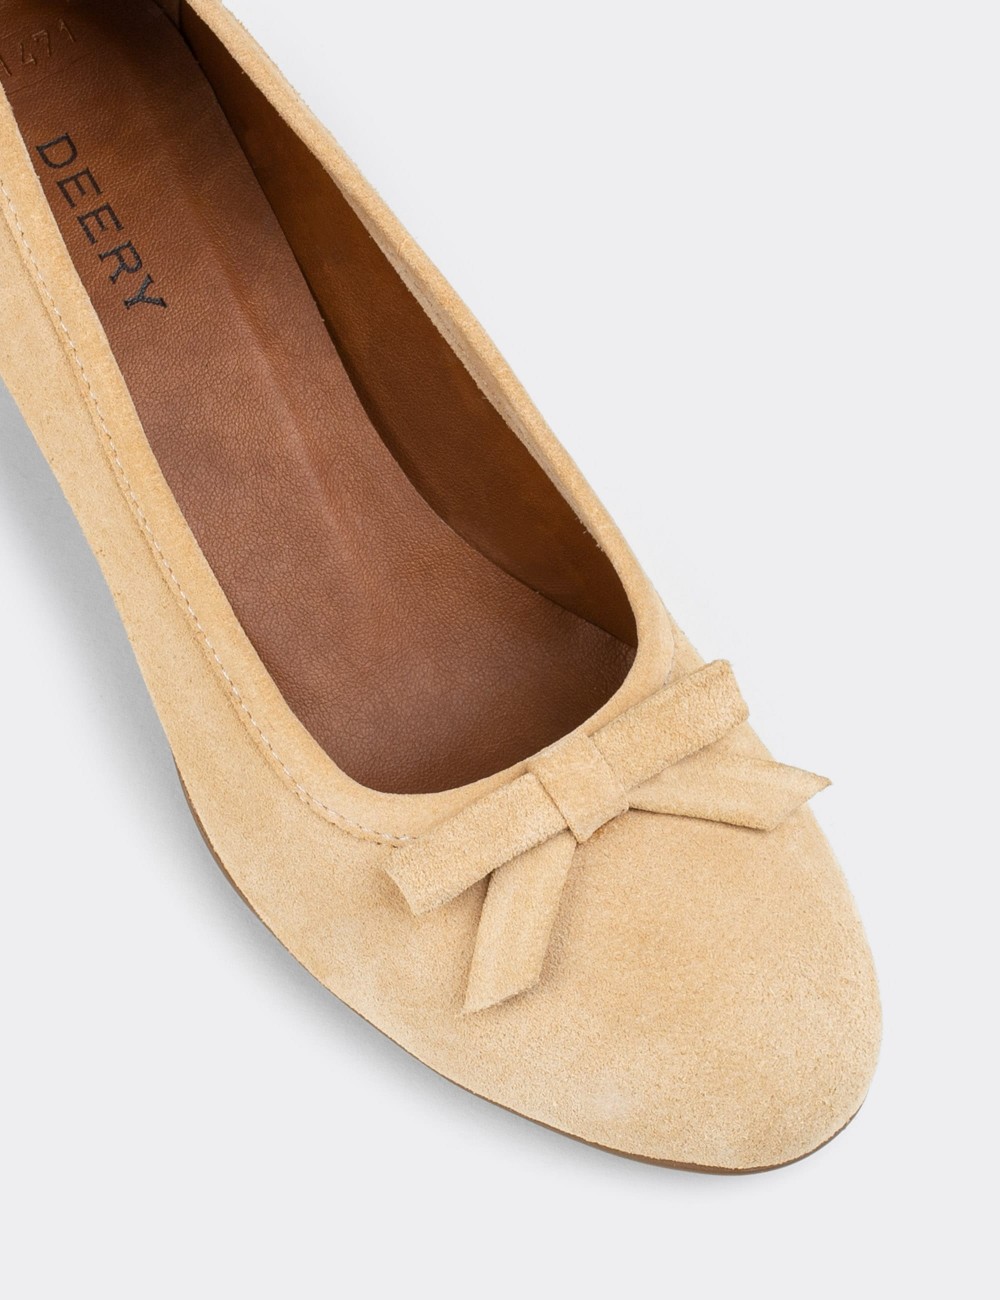 Beige Suede Leather Lace-up Shoes - E1471ZBEJC02